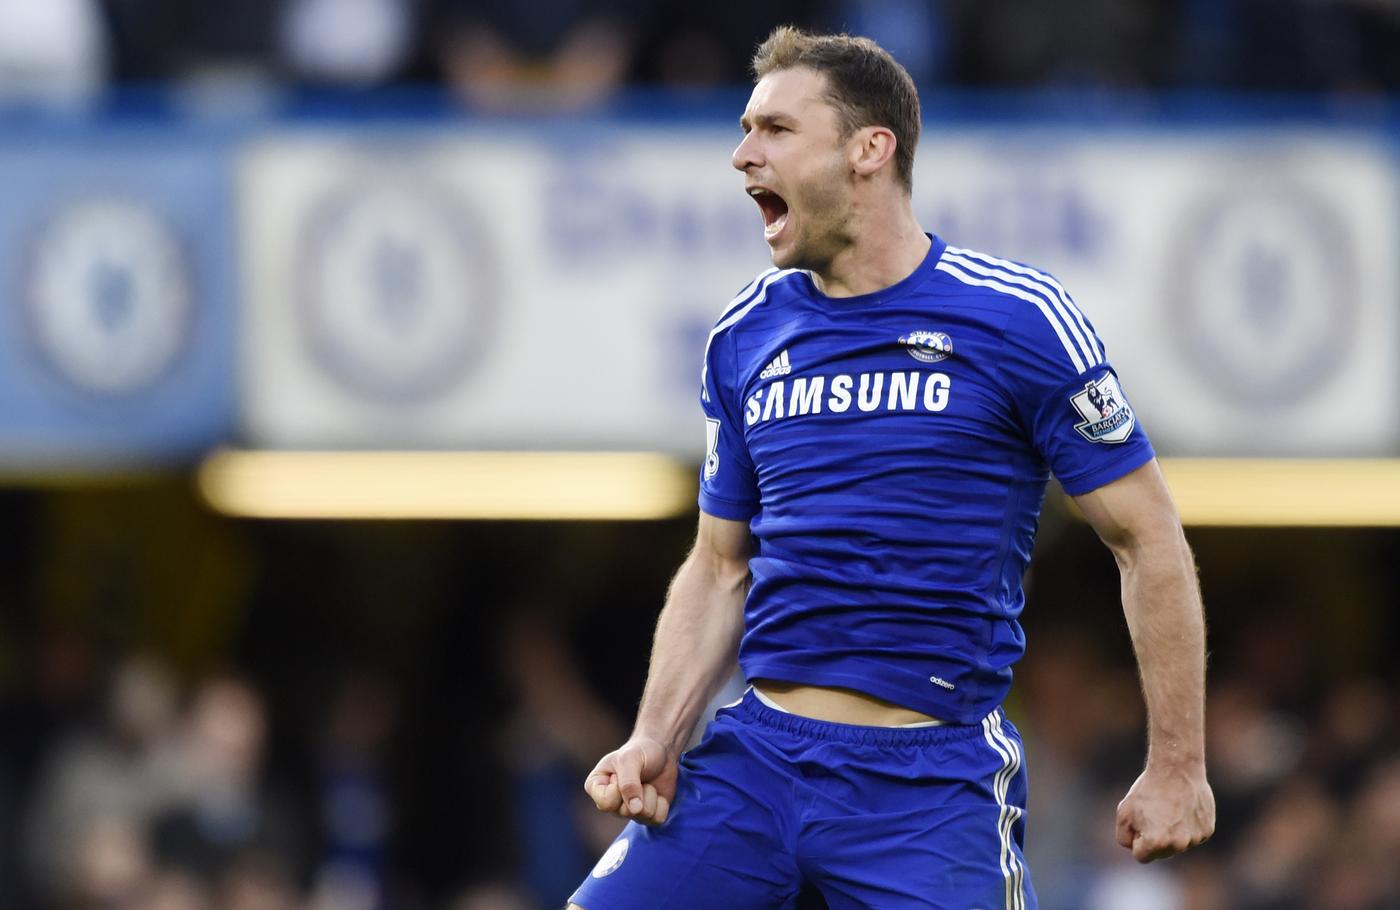 Low cost deal: Inter consider Ivanovic?